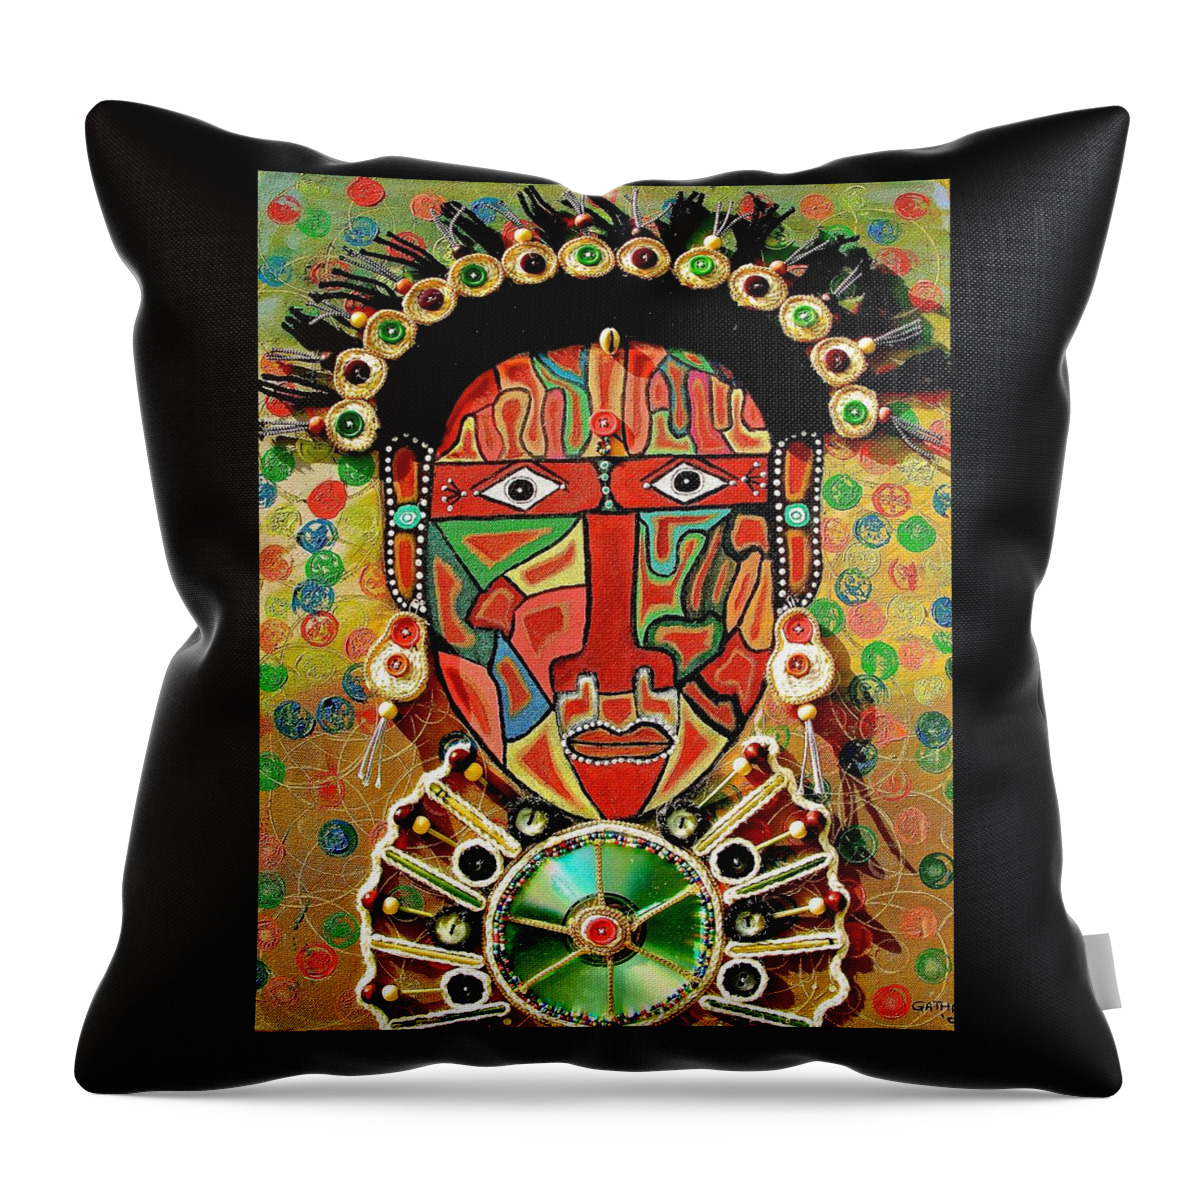 True African Art Throw Pillow featuring the painting Hypnotizing Child by Gathinja